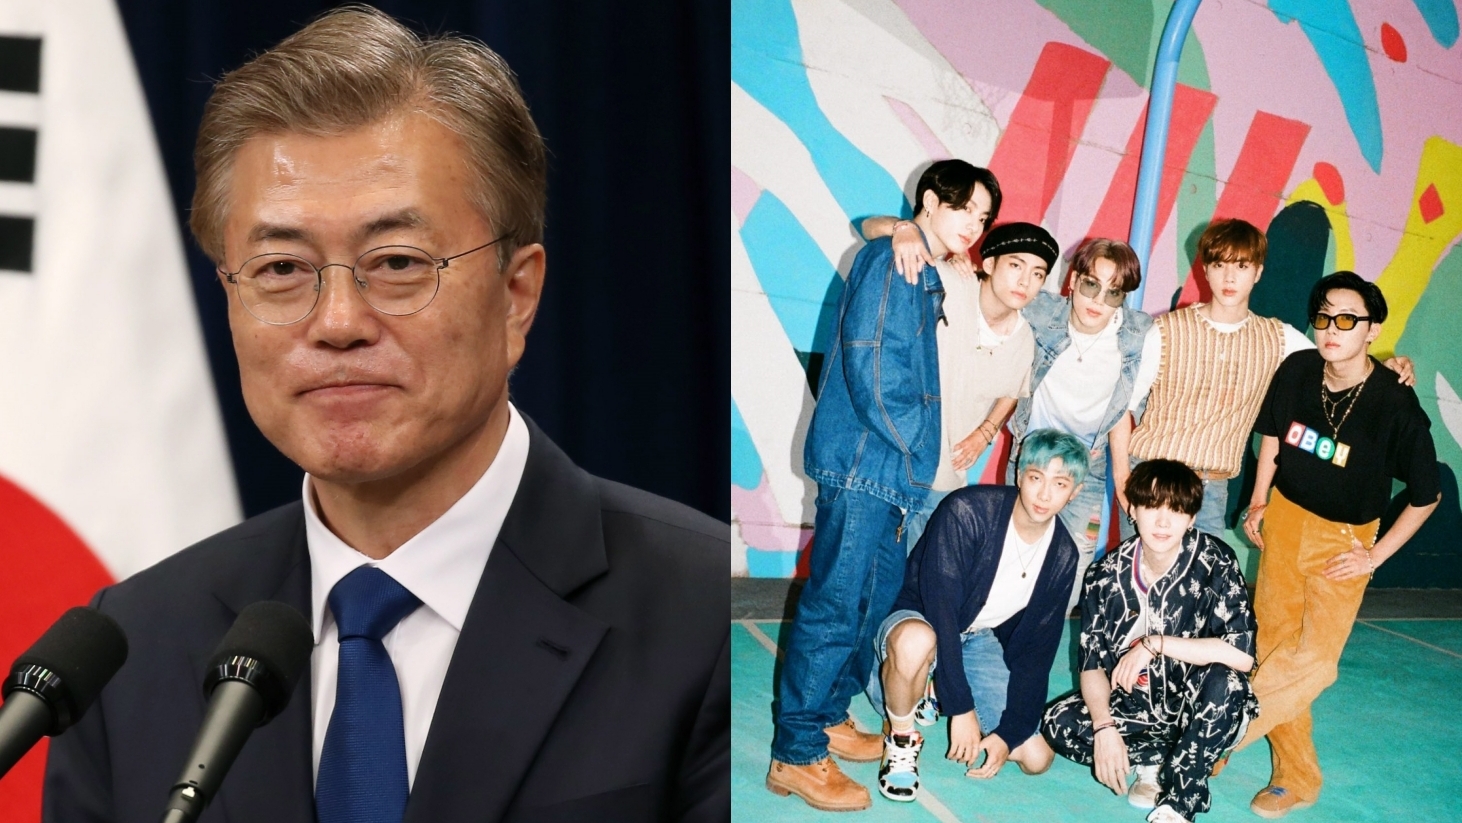 South Korean President Moon Jae In's Response After BTS 'Dynamite' Carved History in the K-Pop Industry